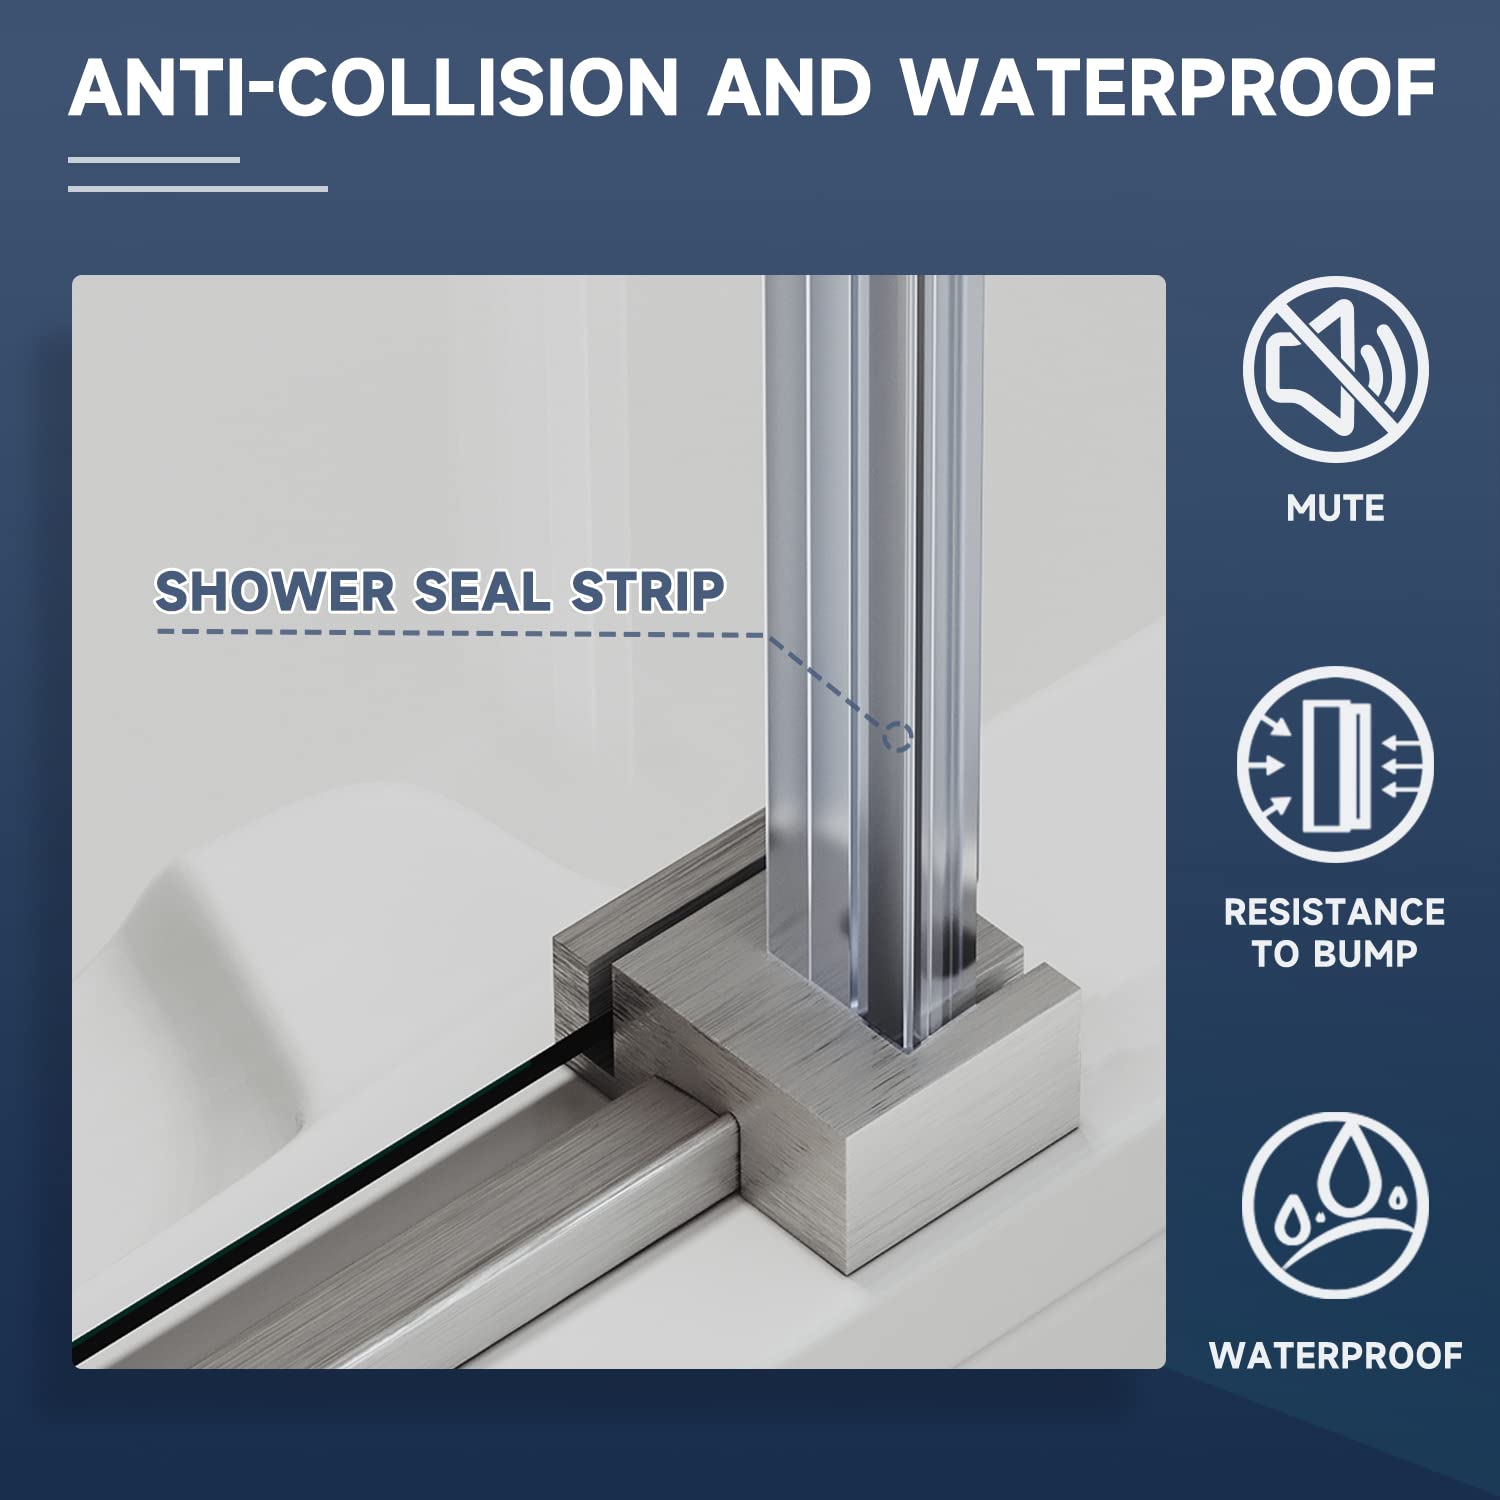 This sliding tub shower door has bottom seal strip that effectively prevents water splashing out, keeping your bathroom tidy and dry at all times.